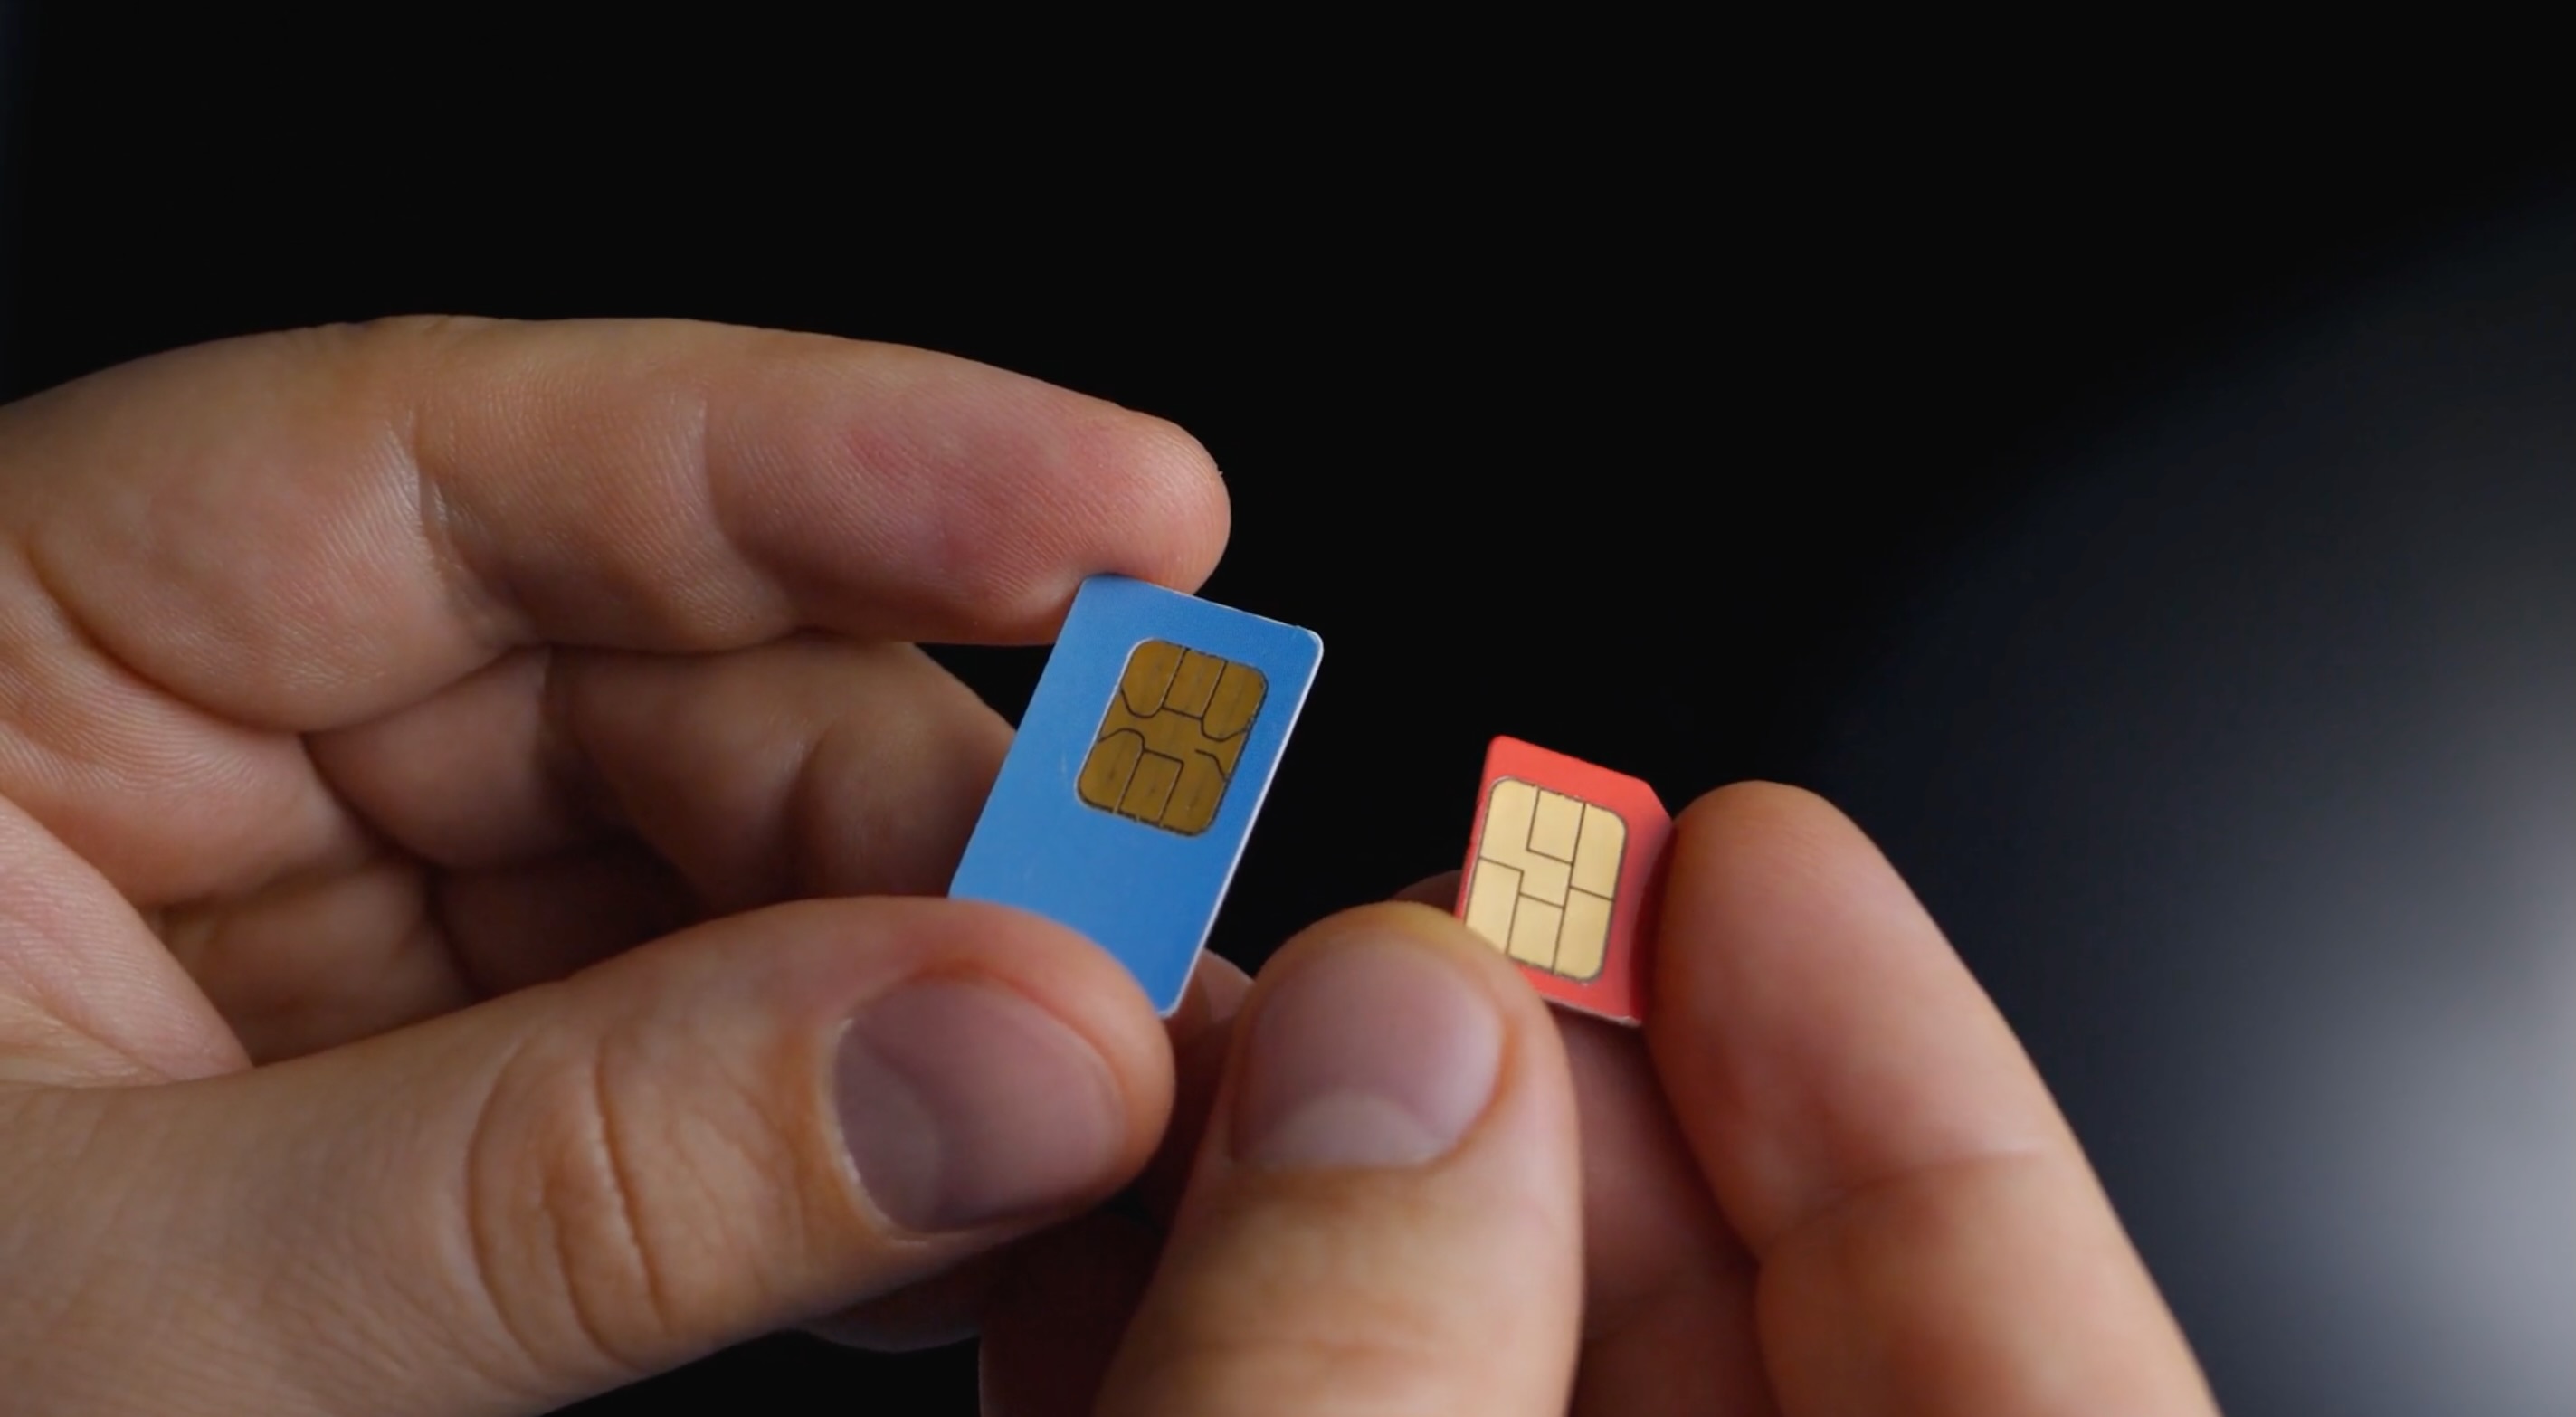 Lost Your SIM Card? Here’s What To Do